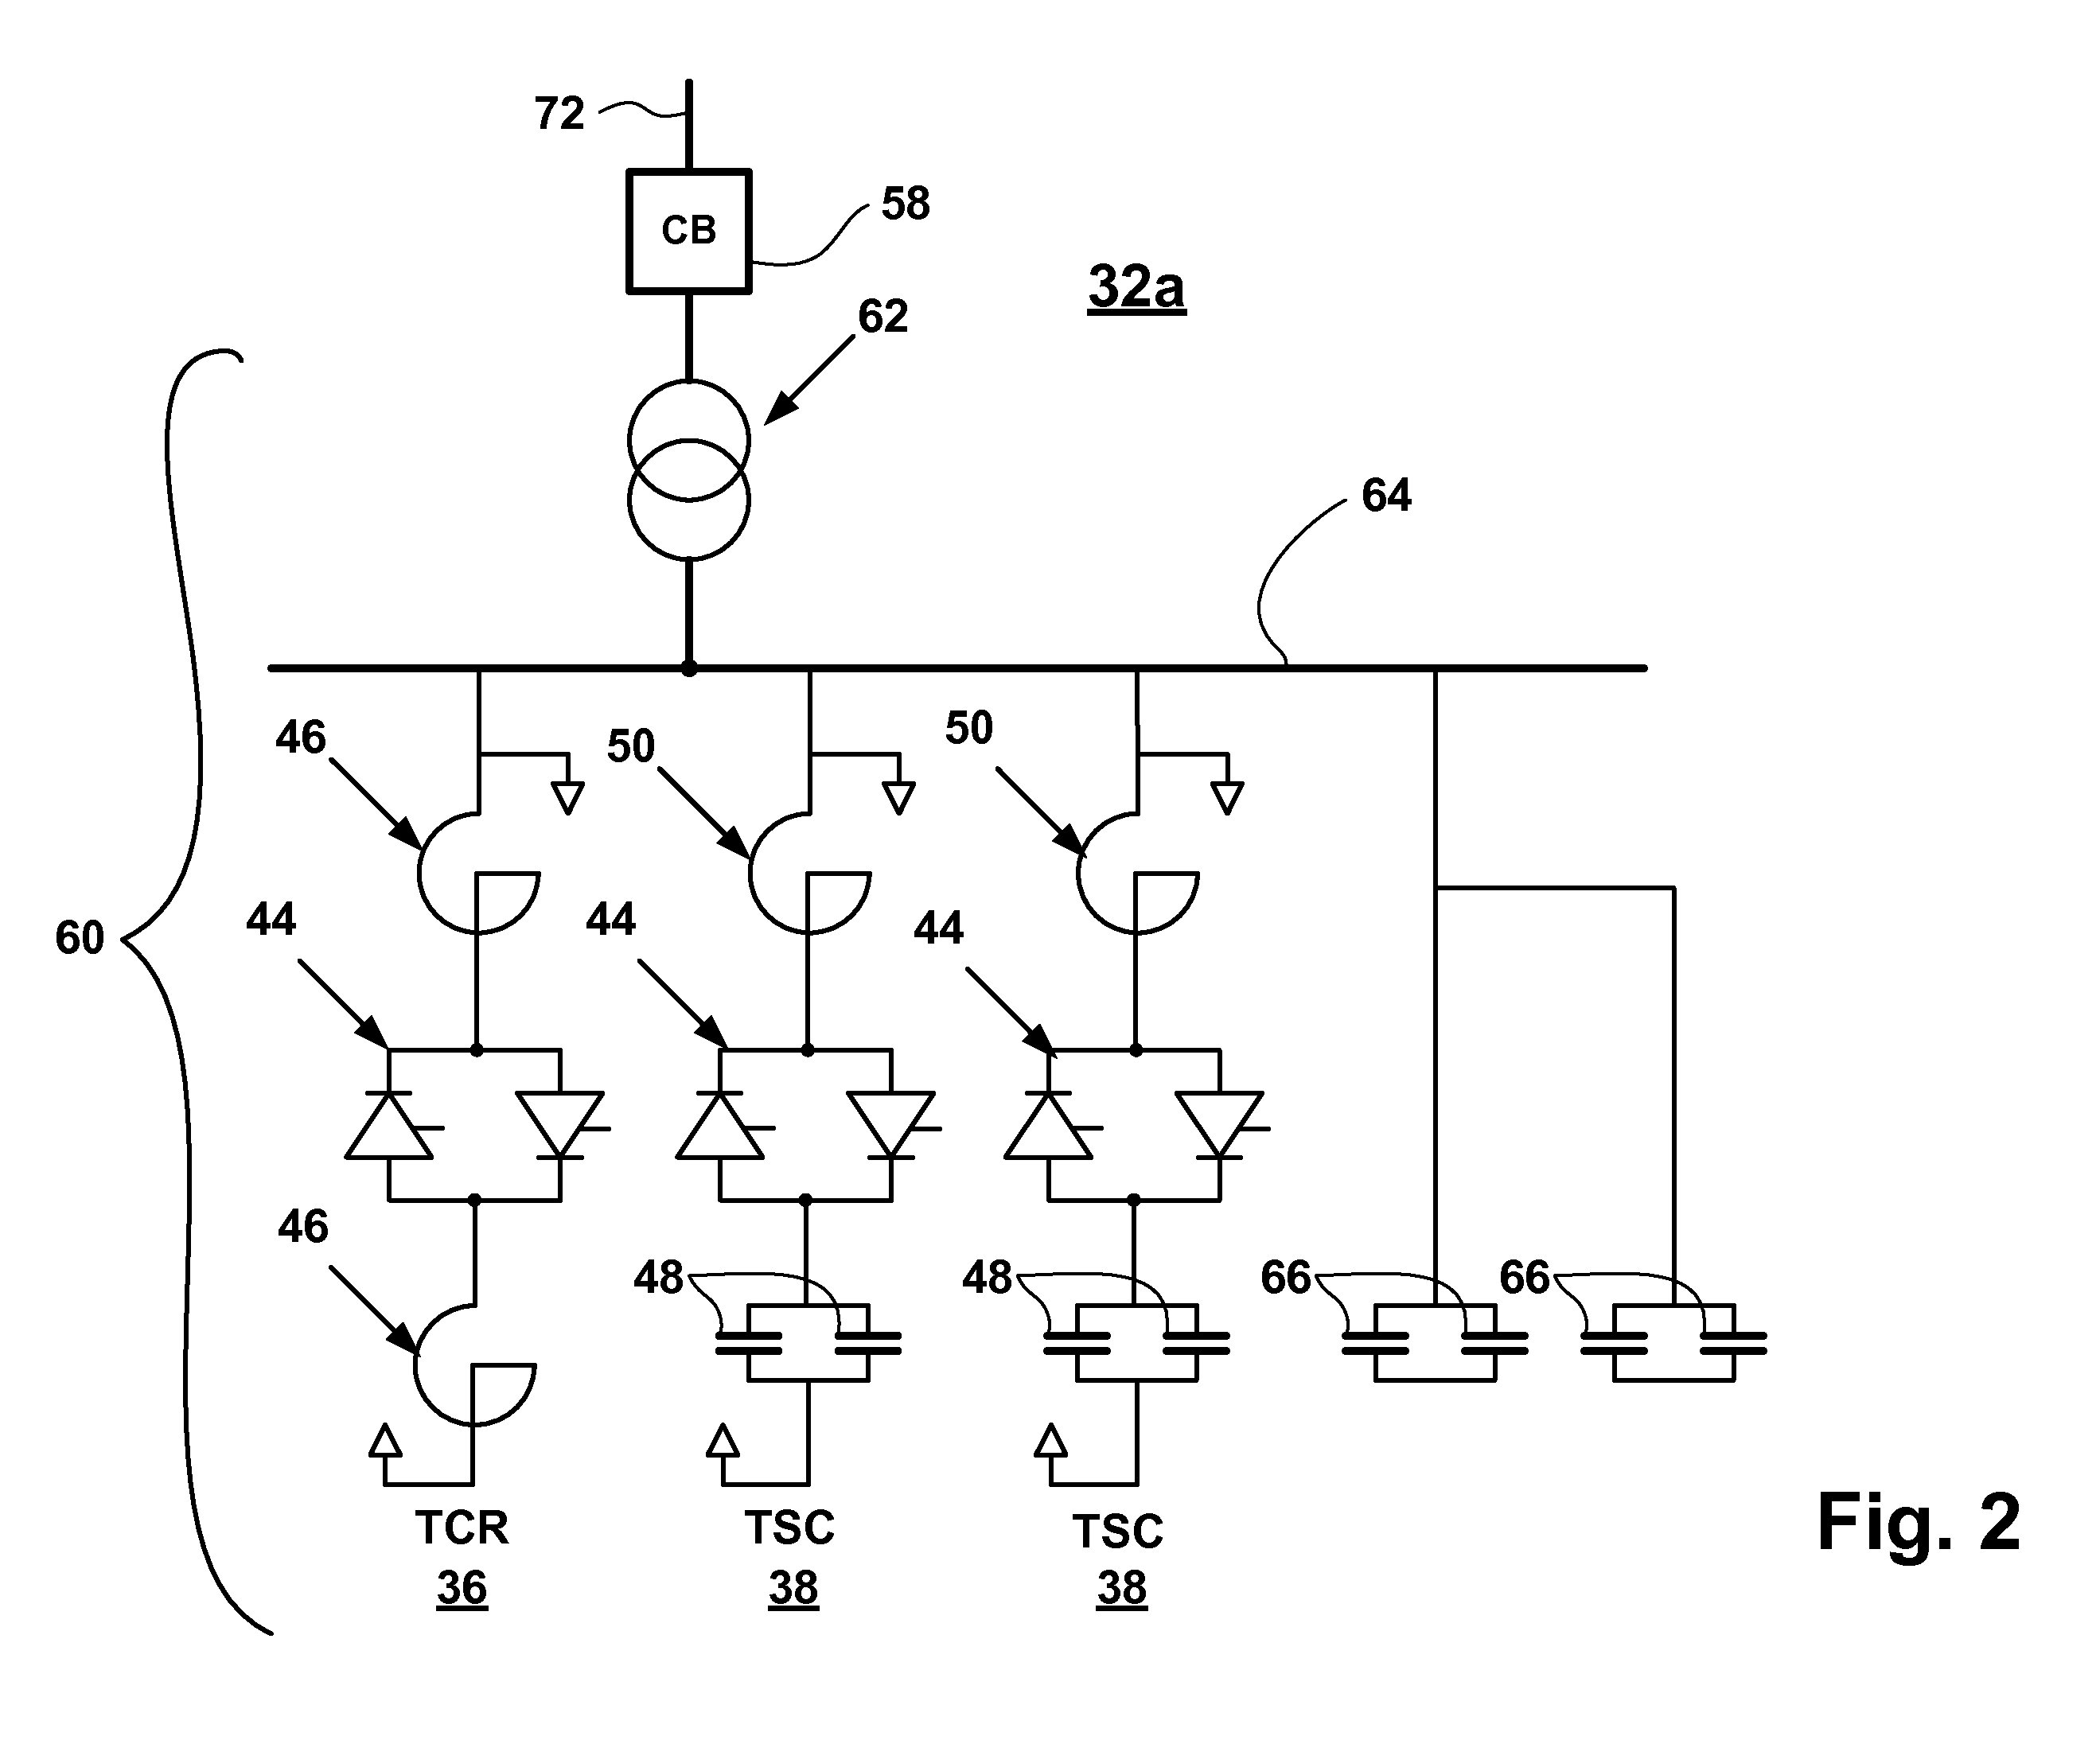 Method and apparatus for improving power generation in a thermal power plant